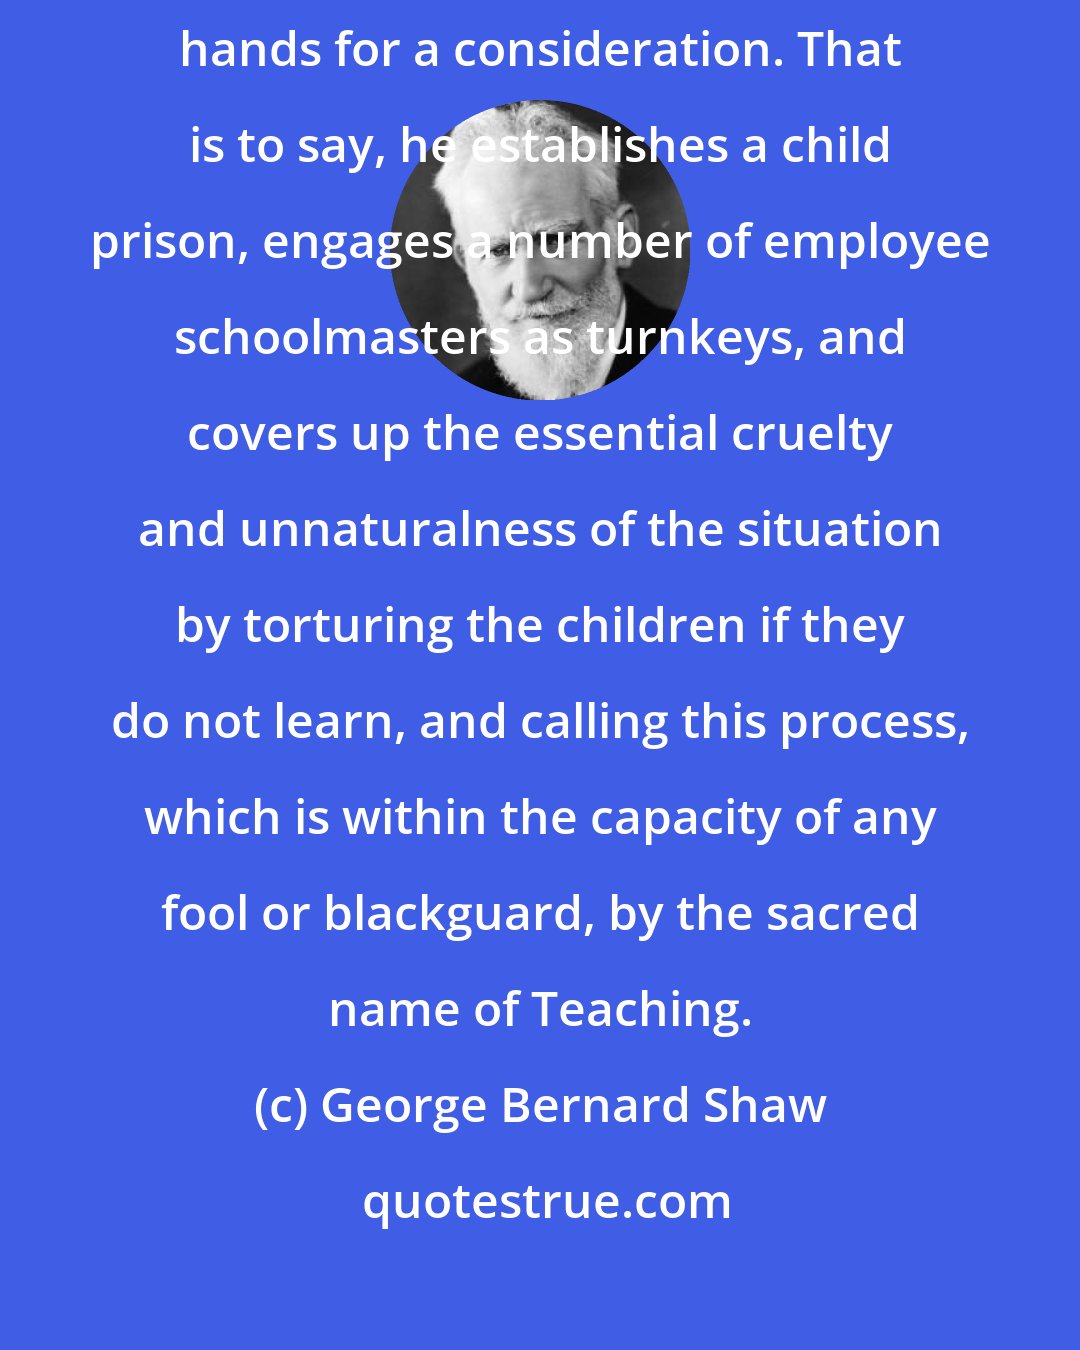 George Bernard Shaw: The schoolmaster is the person who takes the children off the parents' hands for a consideration. That is to say, he establishes a child prison, engages a number of employee schoolmasters as turnkeys, and covers up the essential cruelty and unnaturalness of the situation by torturing the children if they do not learn, and calling this process, which is within the capacity of any fool or blackguard, by the sacred name of Teaching.